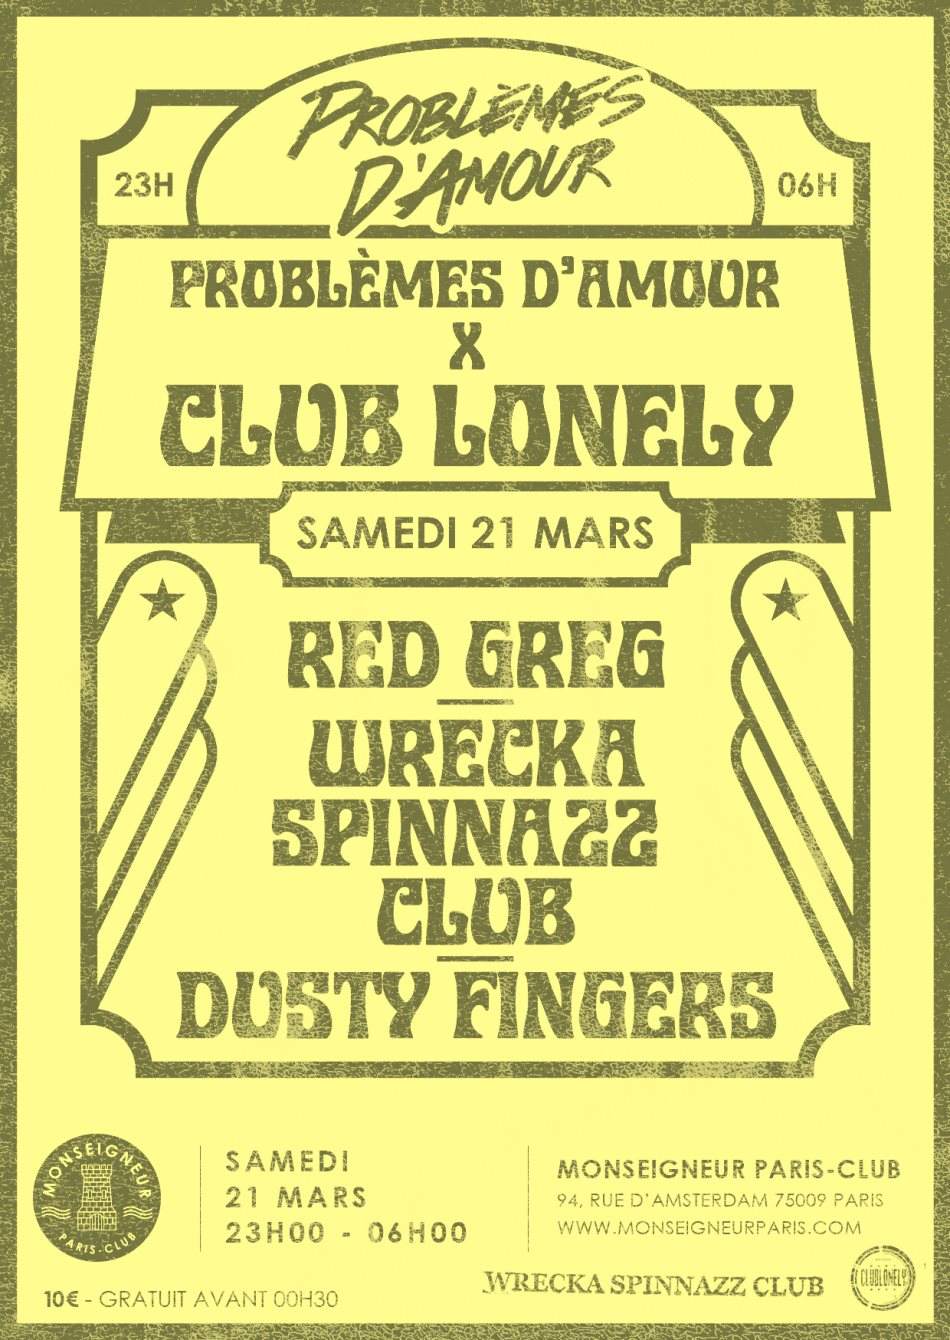 Problèmes D'amour X Club Lonely with Red Greg, Wrecka Spinnazz Club & Dusty Fingers - Página frontal